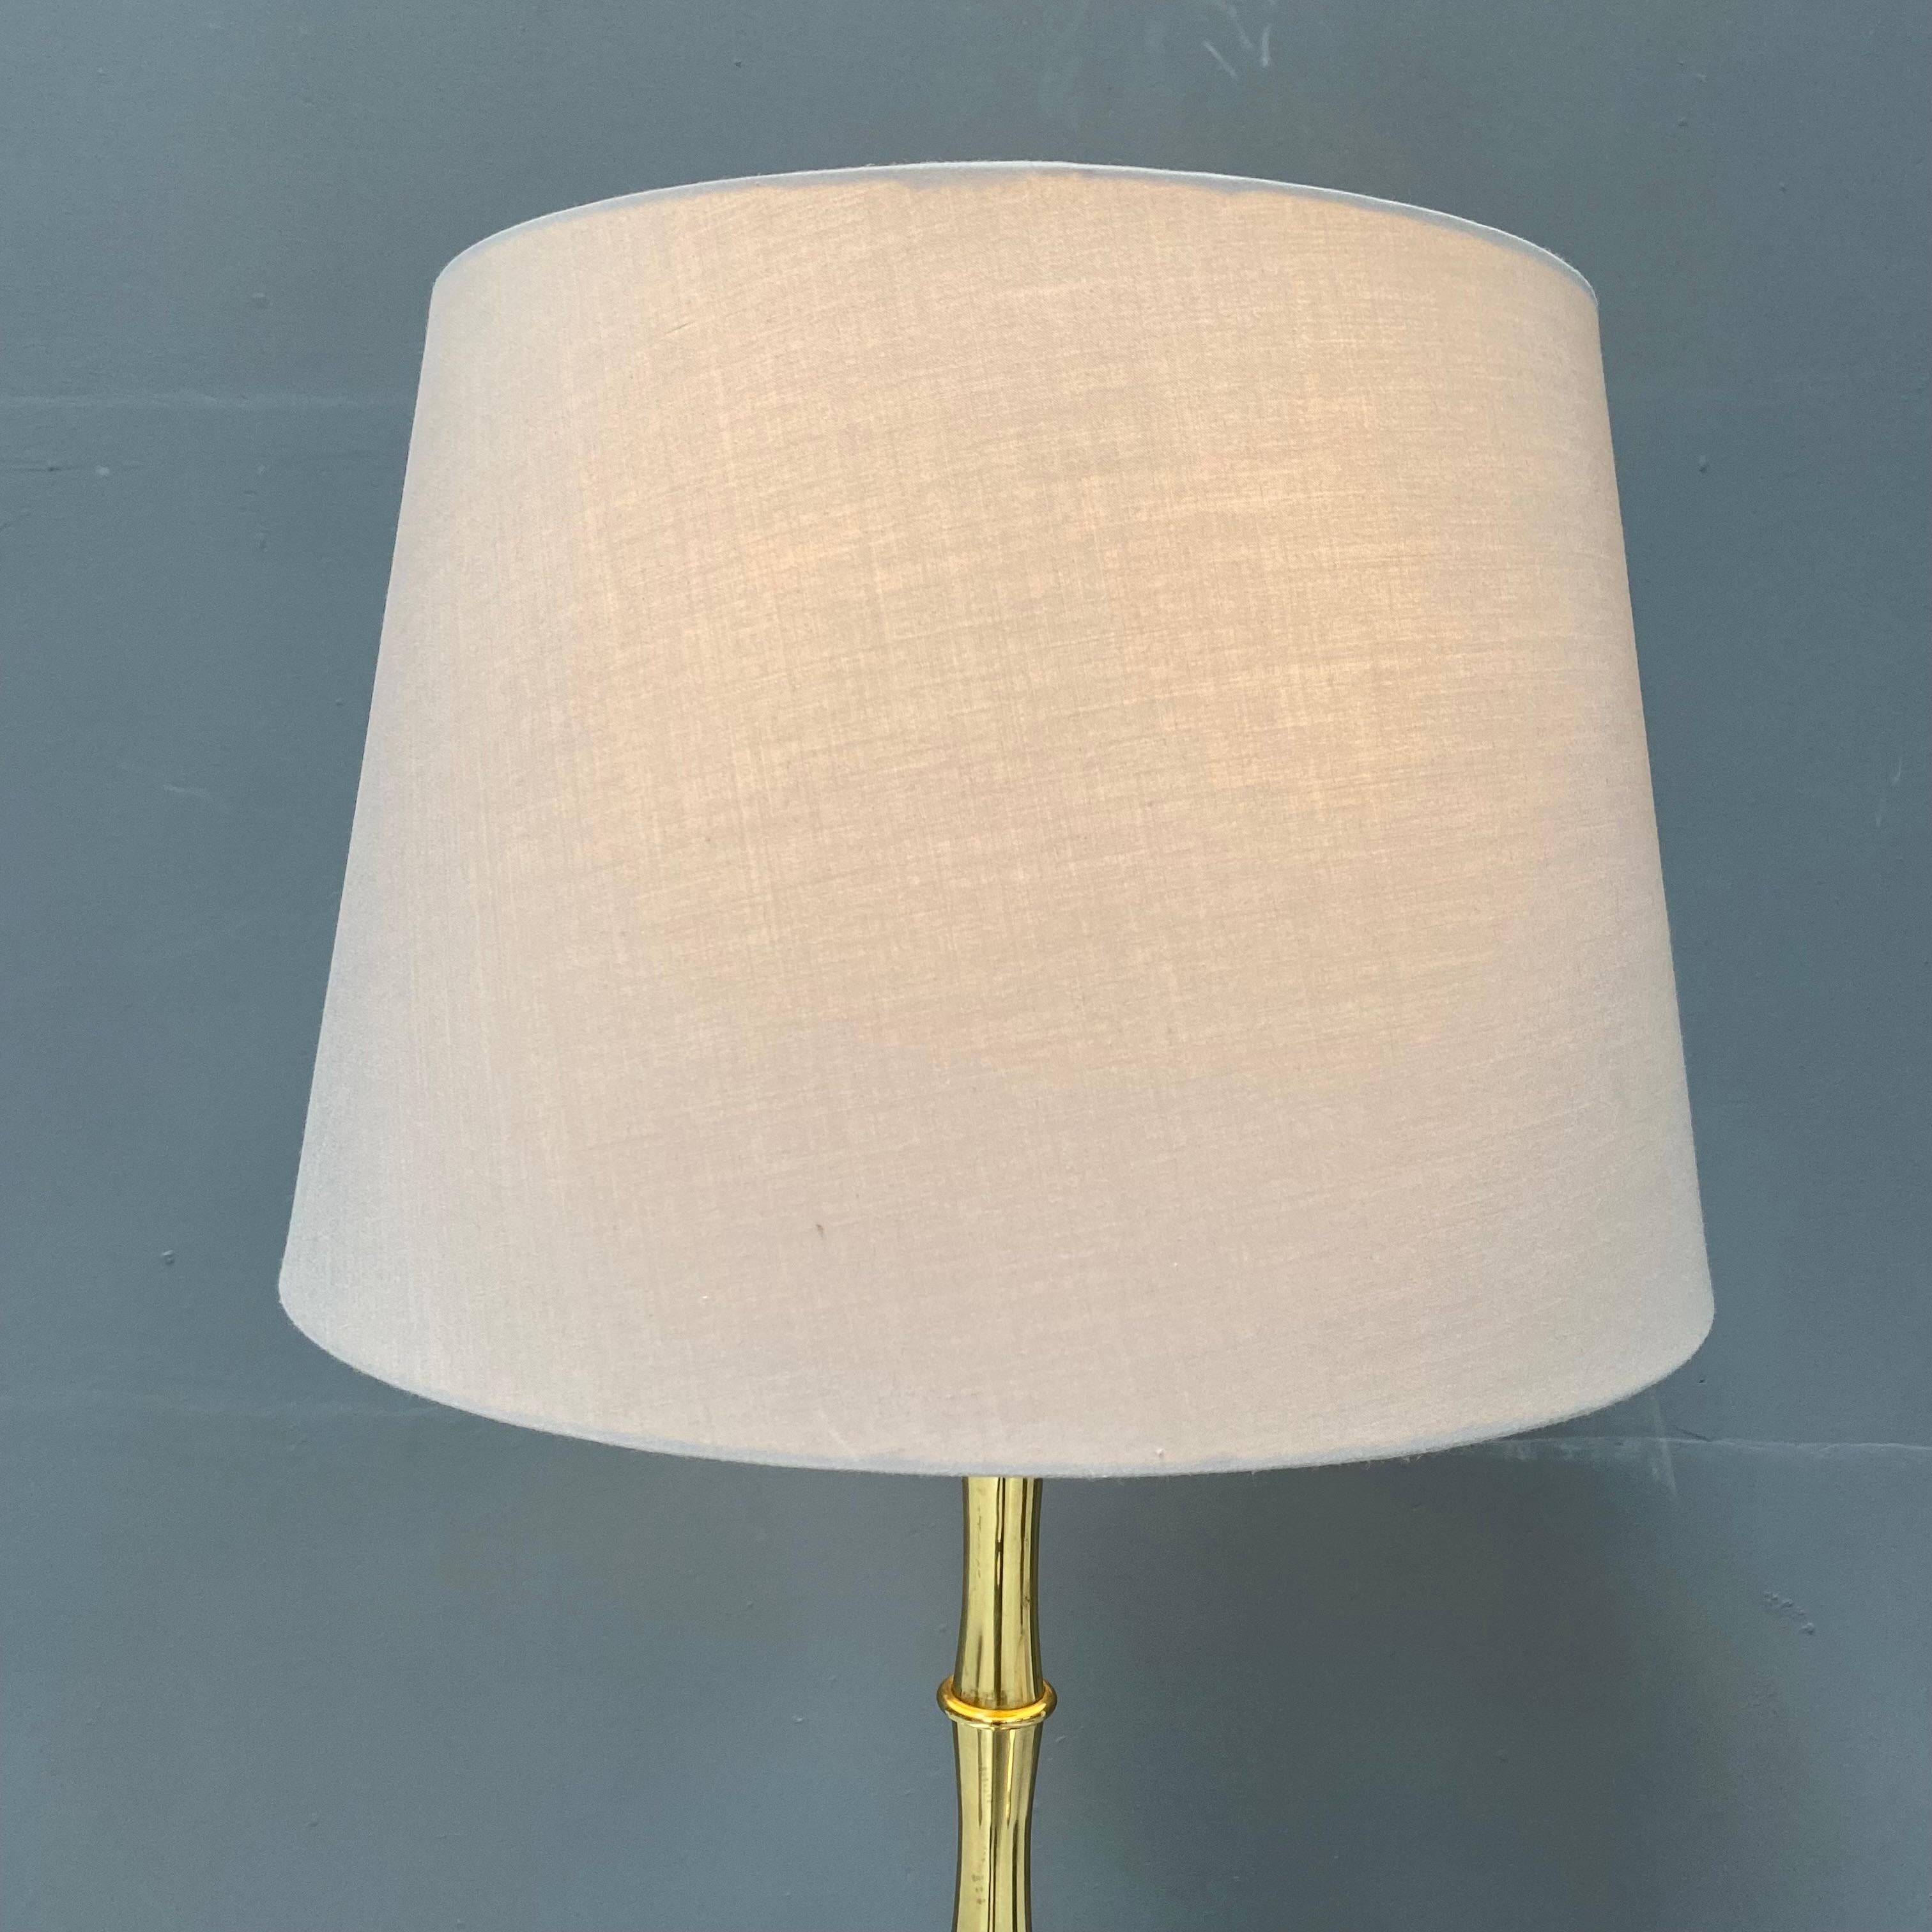 Vintage Bamboo Table Lamp in Brass by Ingo Maurer for M Design, 1960s. In Good Condition For Sale In Eindhoven, Noord Brabant